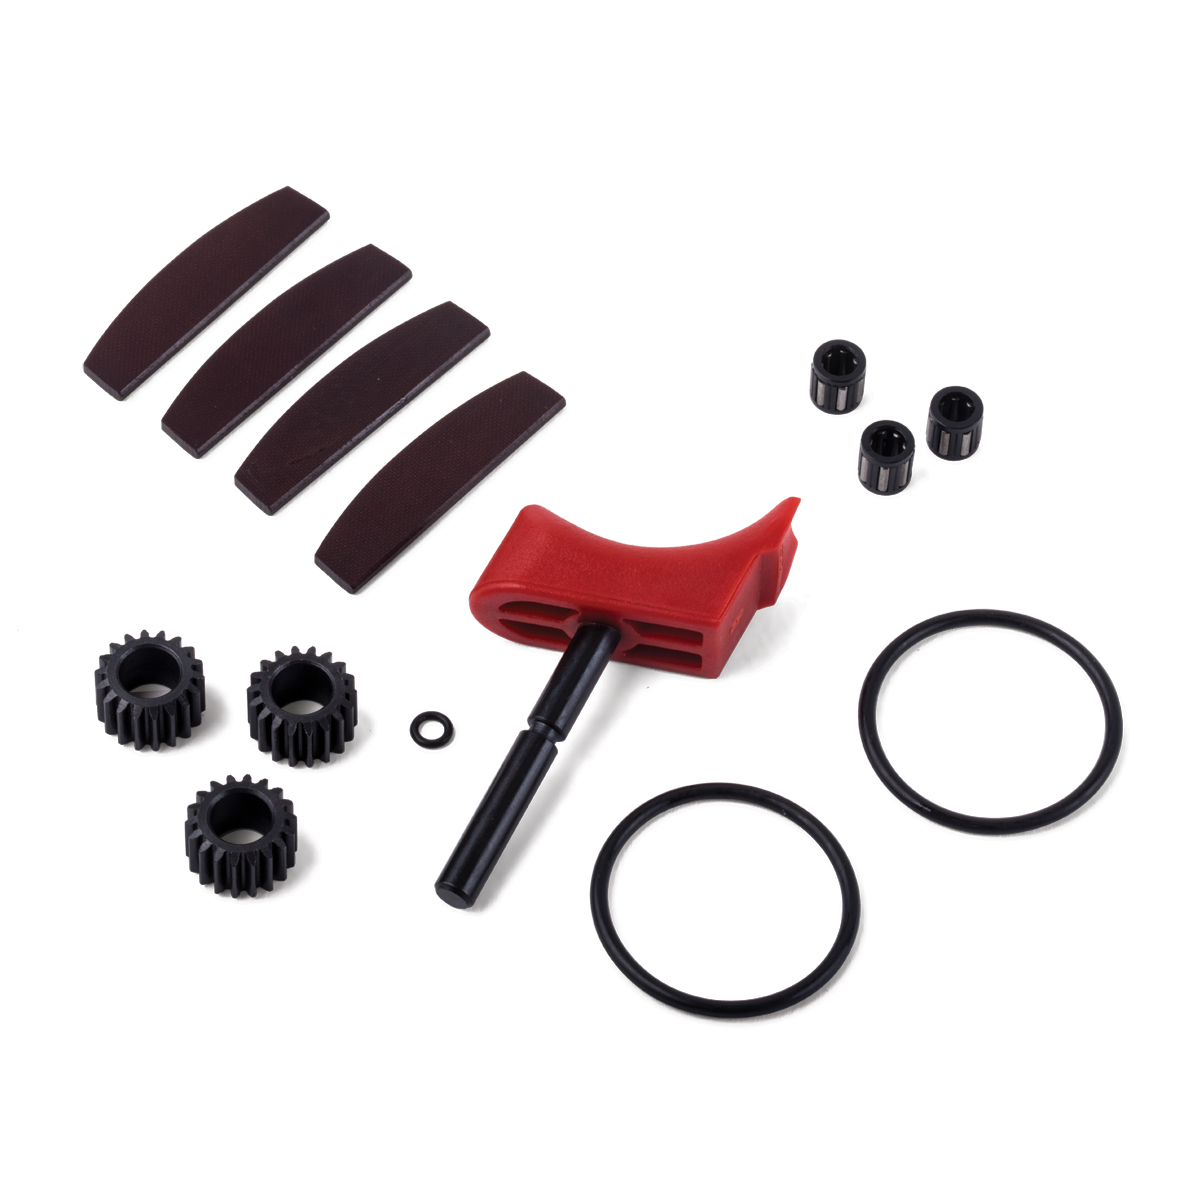 Rebuild Kit For High-Powered 1/2" Air Drill